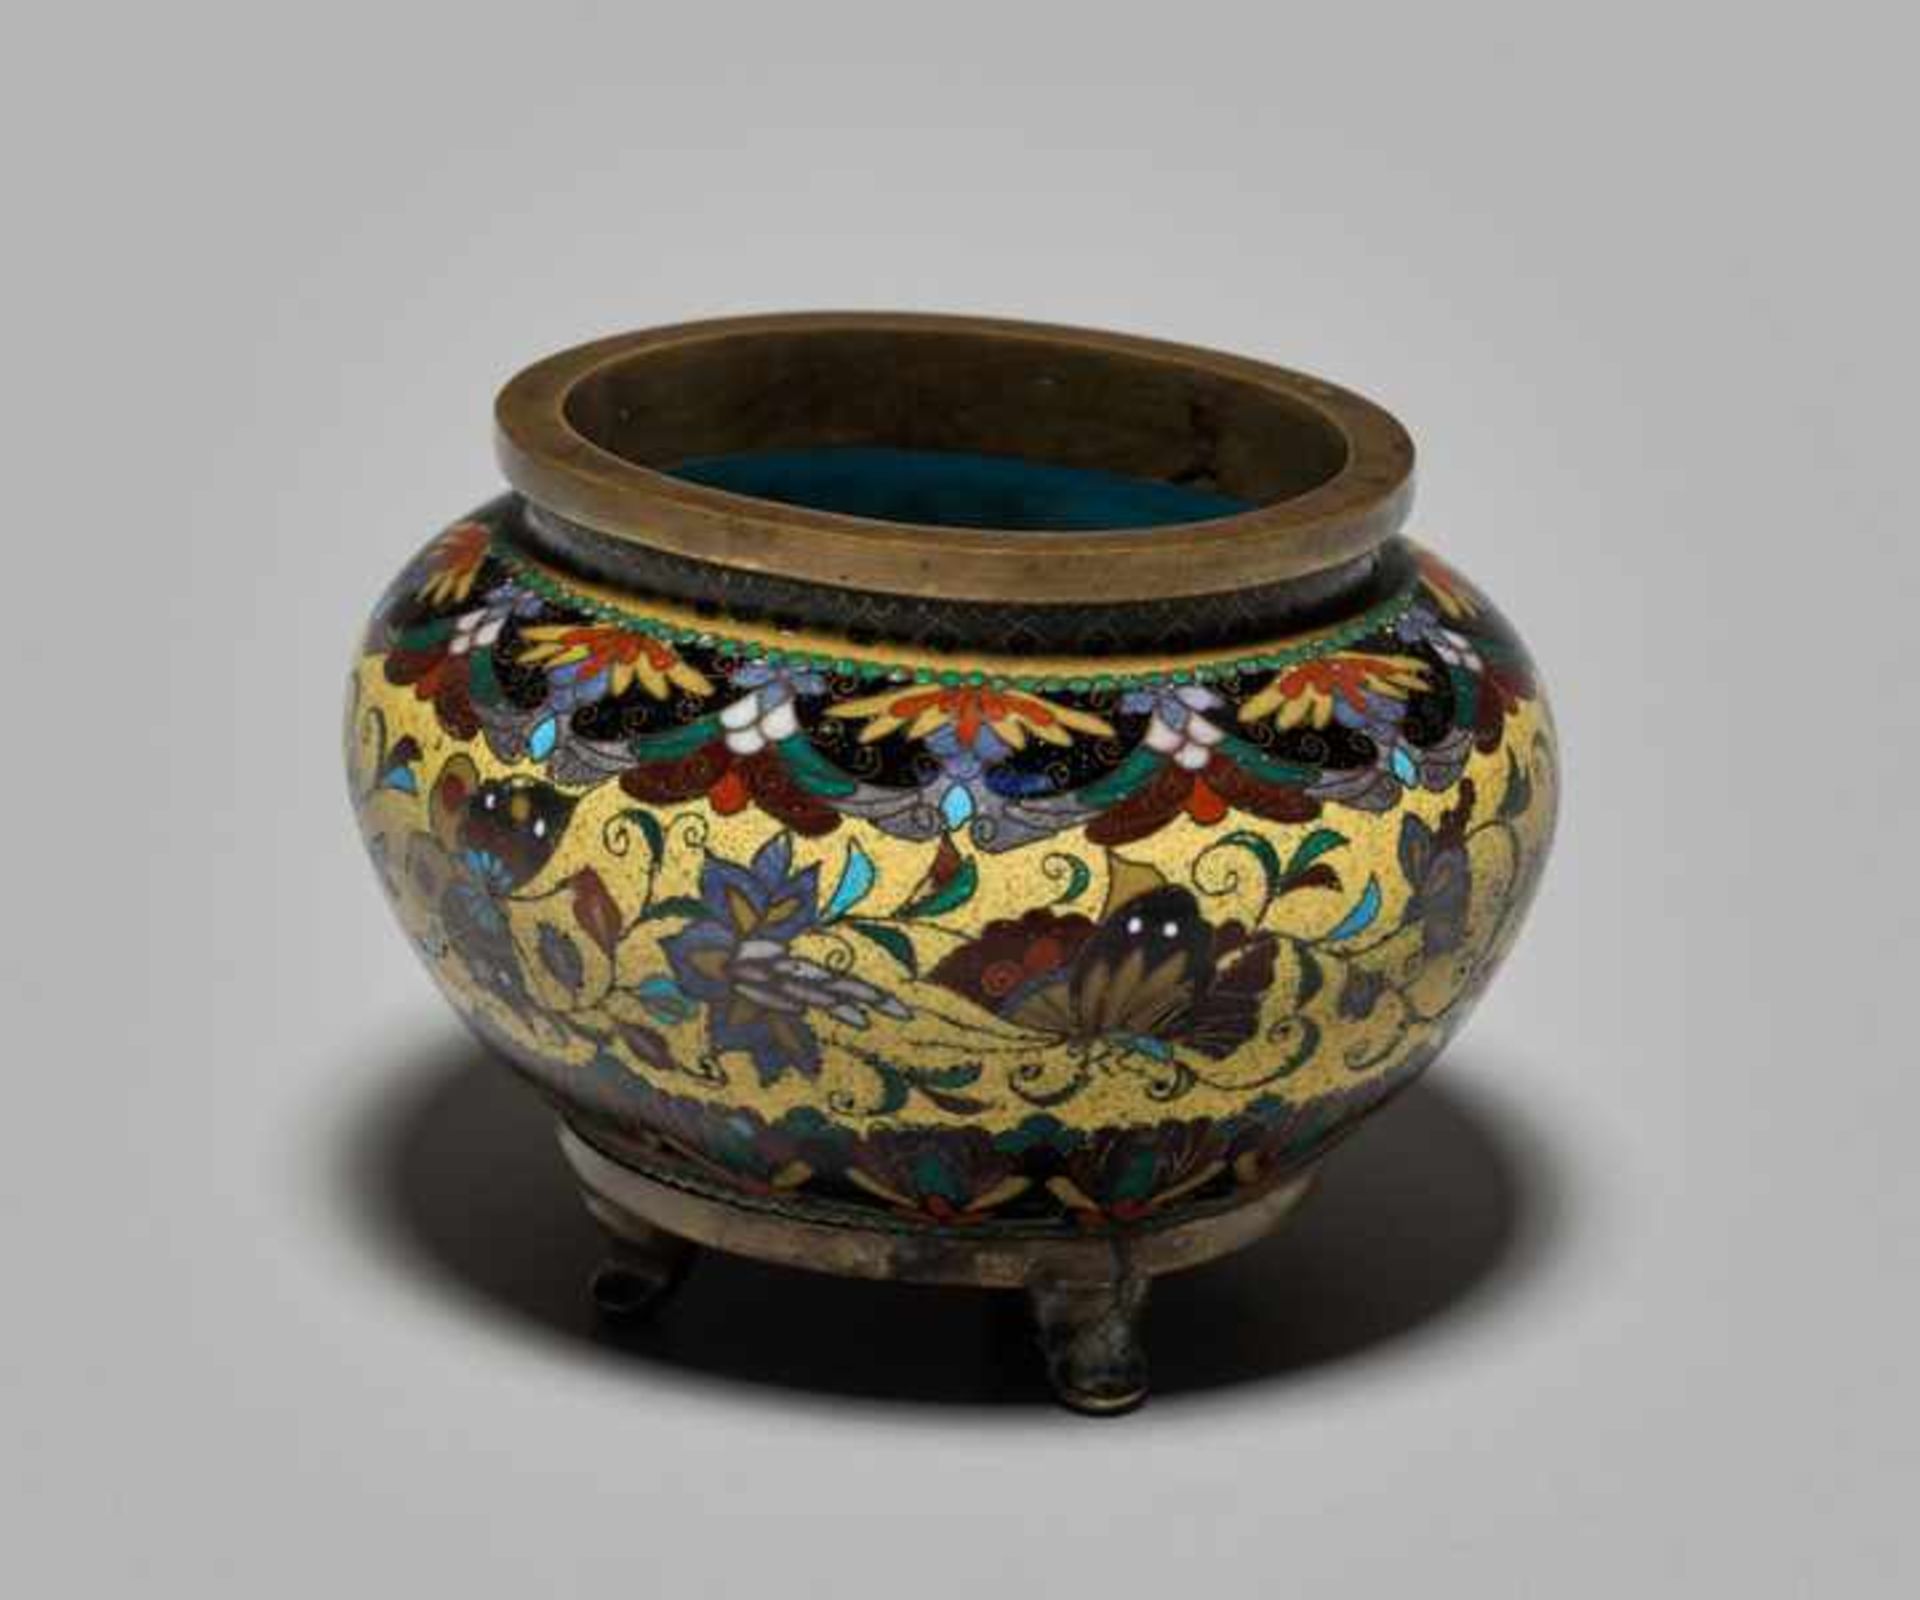 A CLOISONNÉ KORO WITH BLOSSOMS AND BUTTERFLIES IN THE STYLE OF NAMIKAWA YASUYUKI Colored enamel - Image 2 of 8